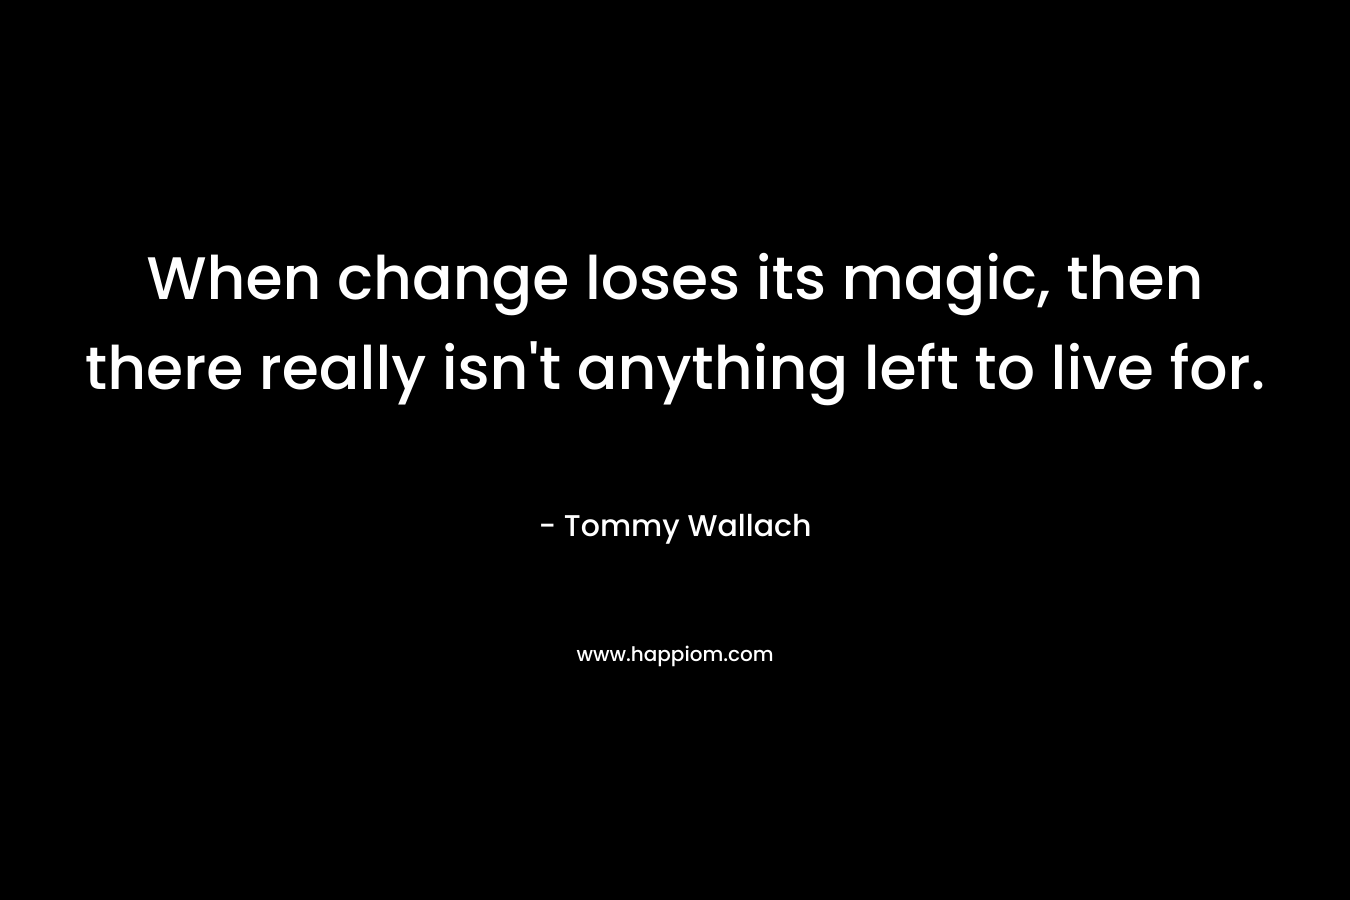 When change loses its magic, then there really isn’t anything left to live for. – Tommy Wallach